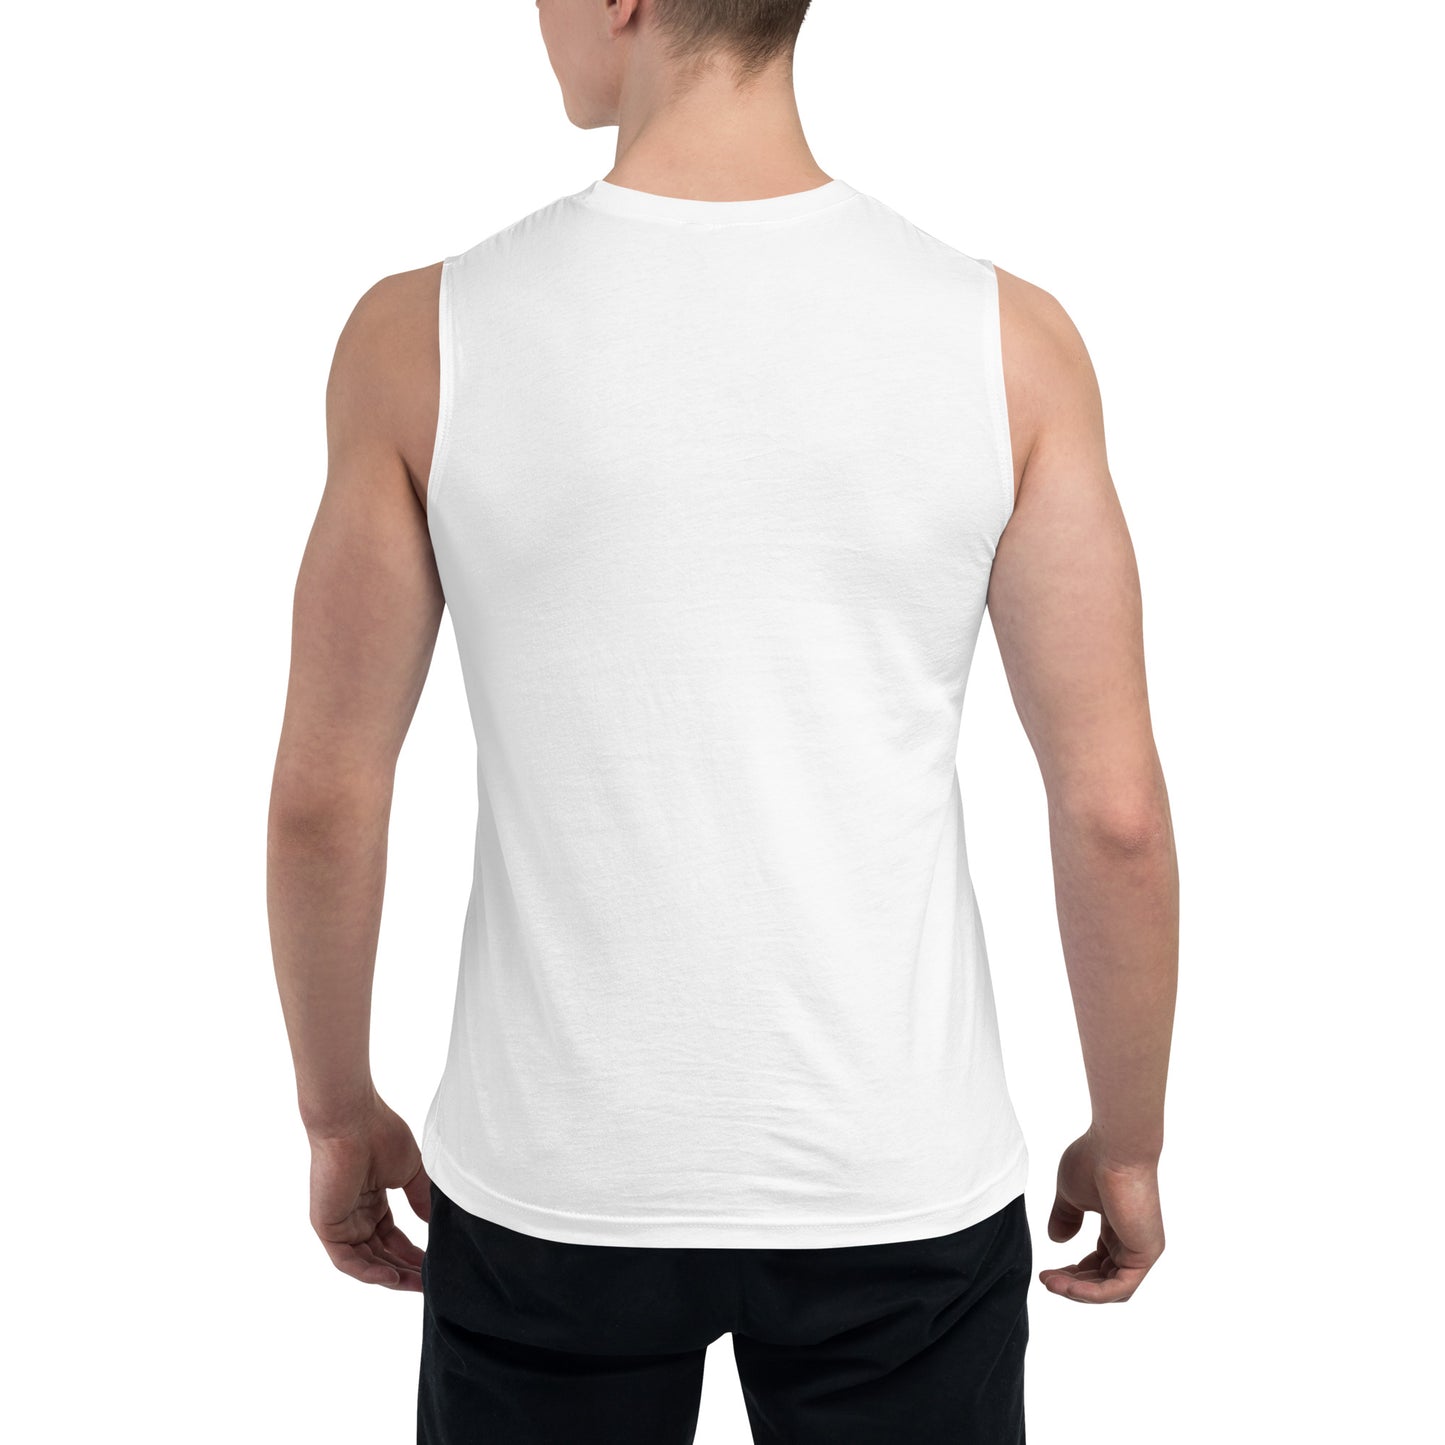 Small Black Sphere Muscle Shirt